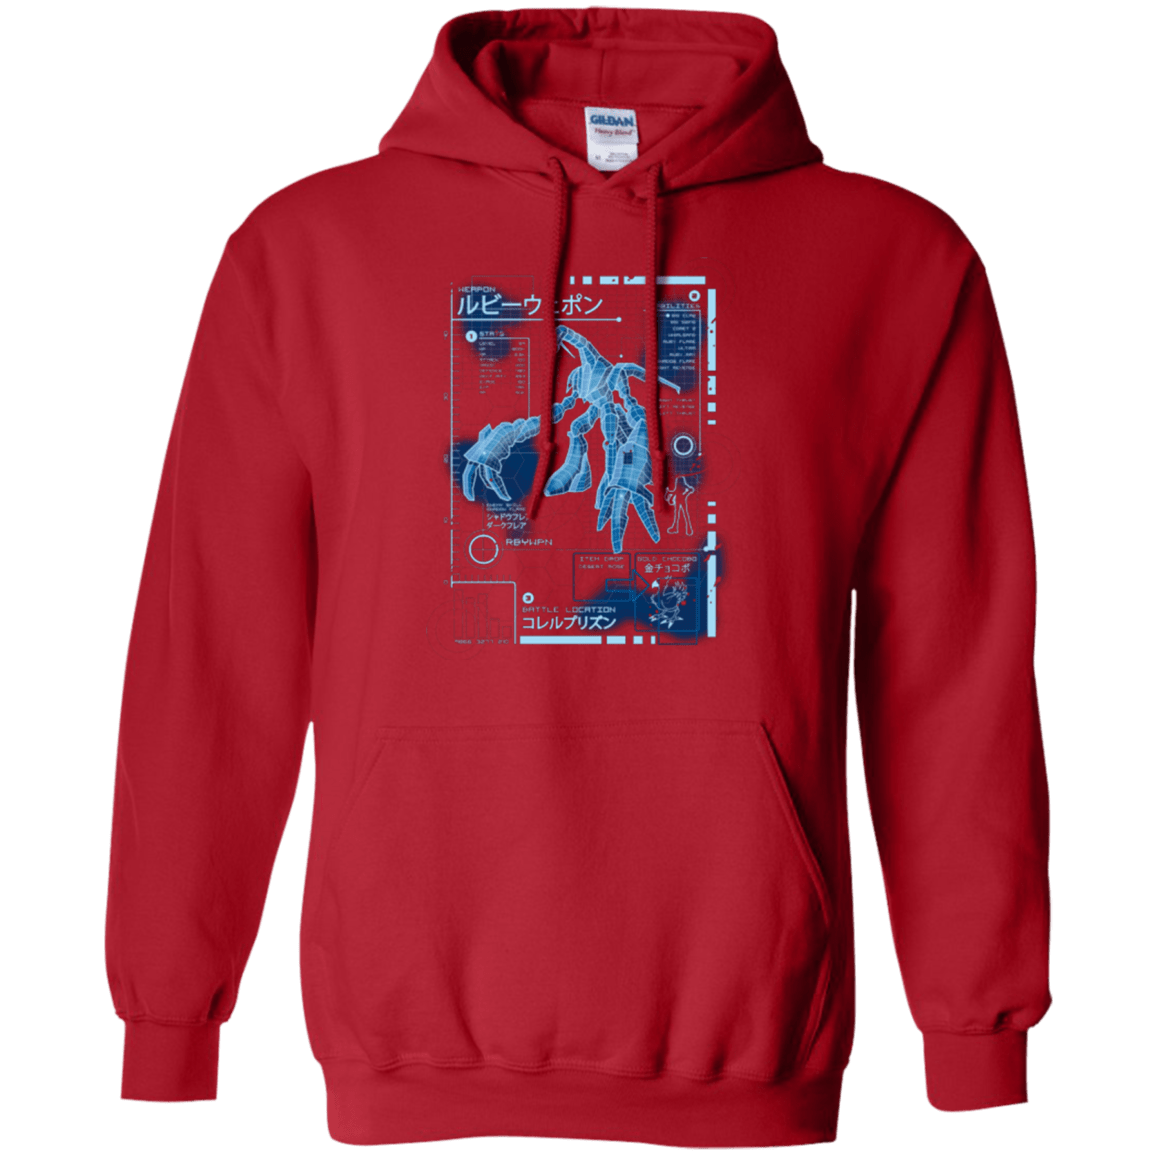 Sweatshirts Red / Small RUBY BLUEPRINT Pullover Hoodie